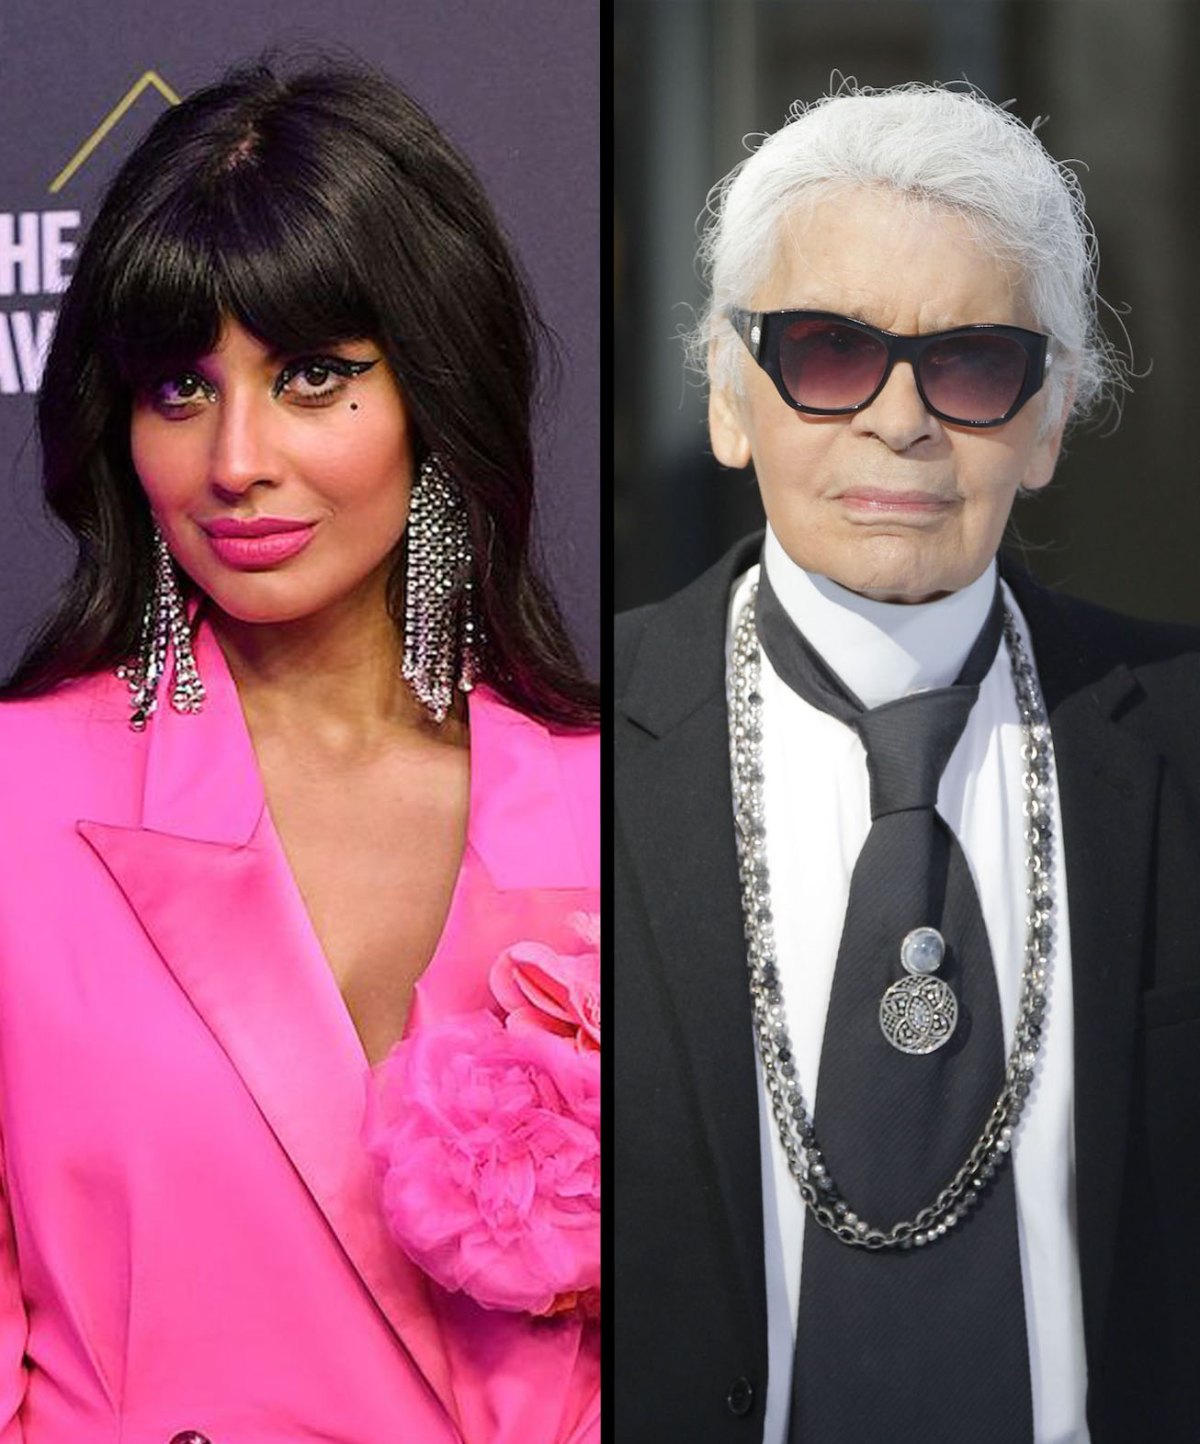 What now for the Lagerfeld labels?